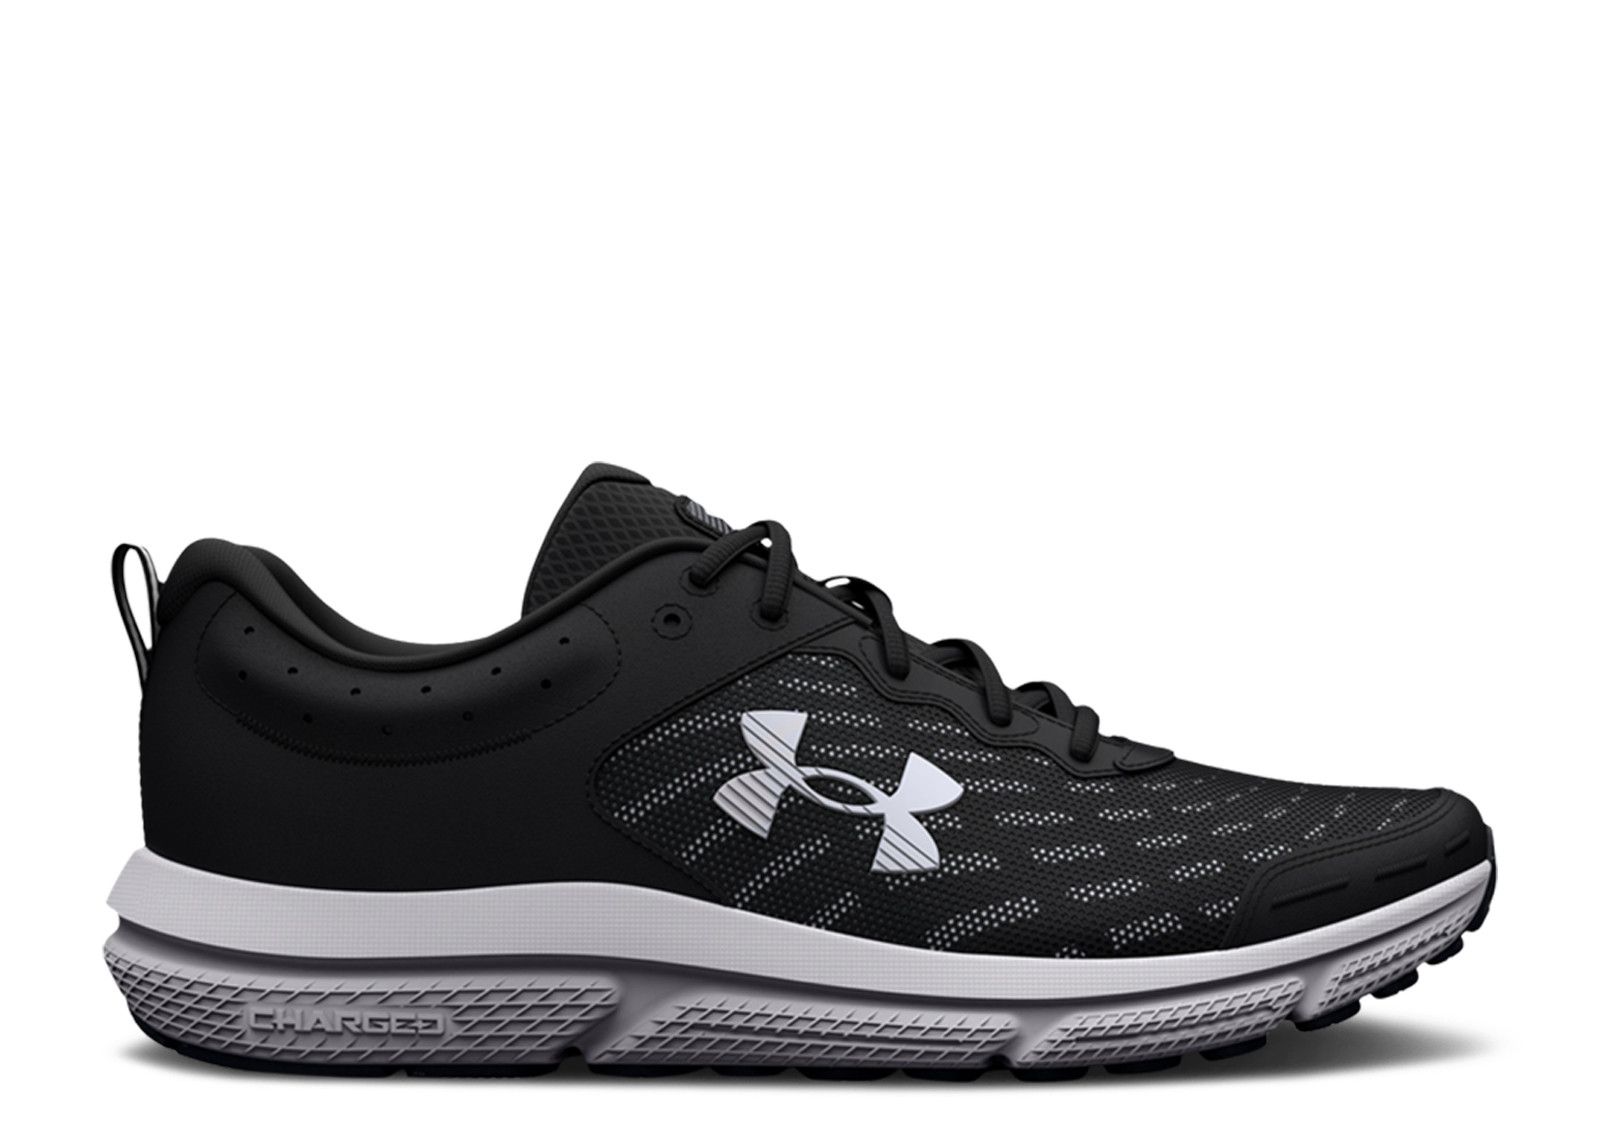 Charged Assert 10 'Black White' - Under Armour - 3026175 001 - black ...